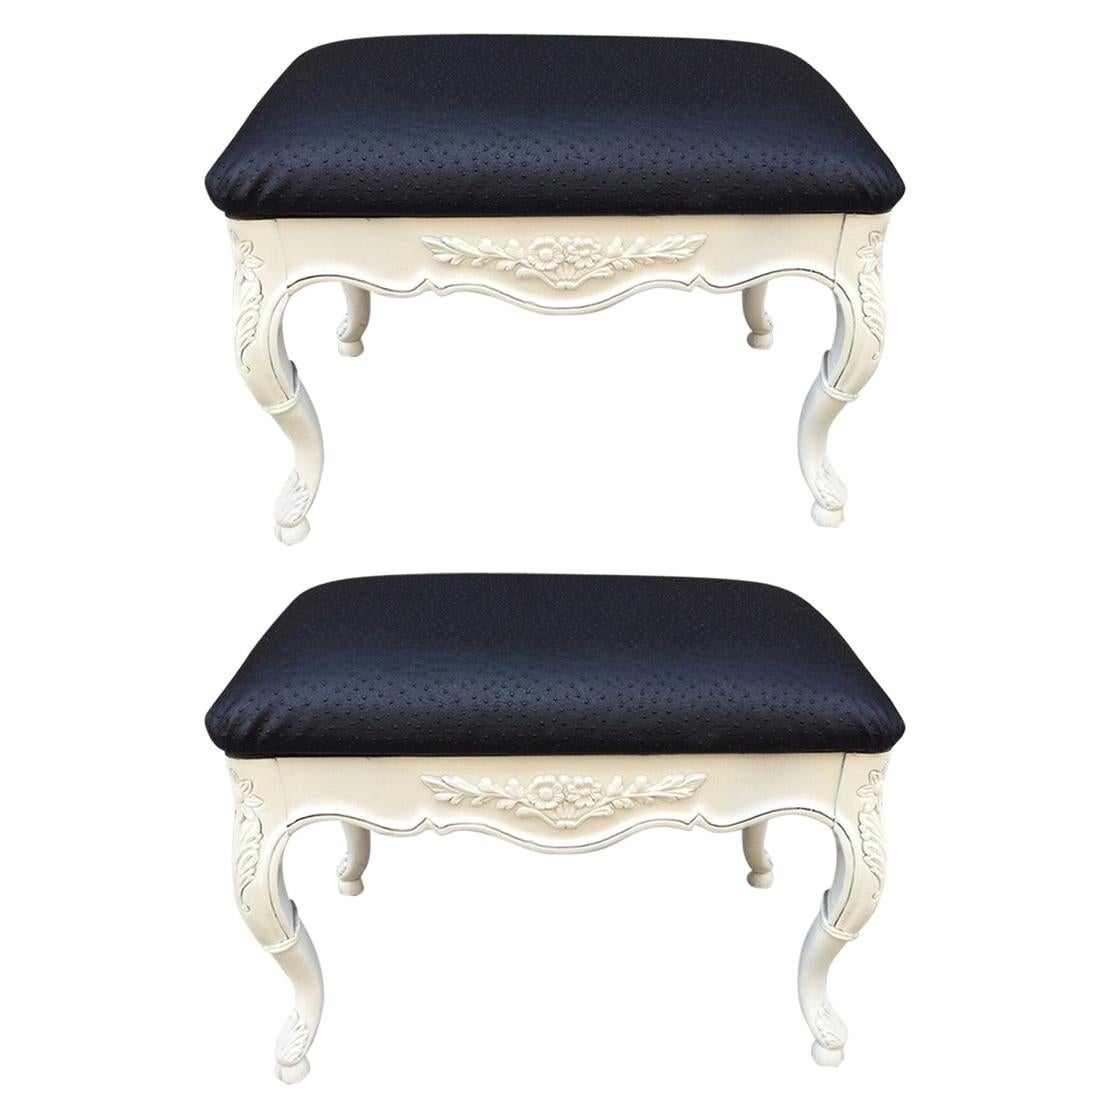 Pair of Hollywood Regency Style Benches